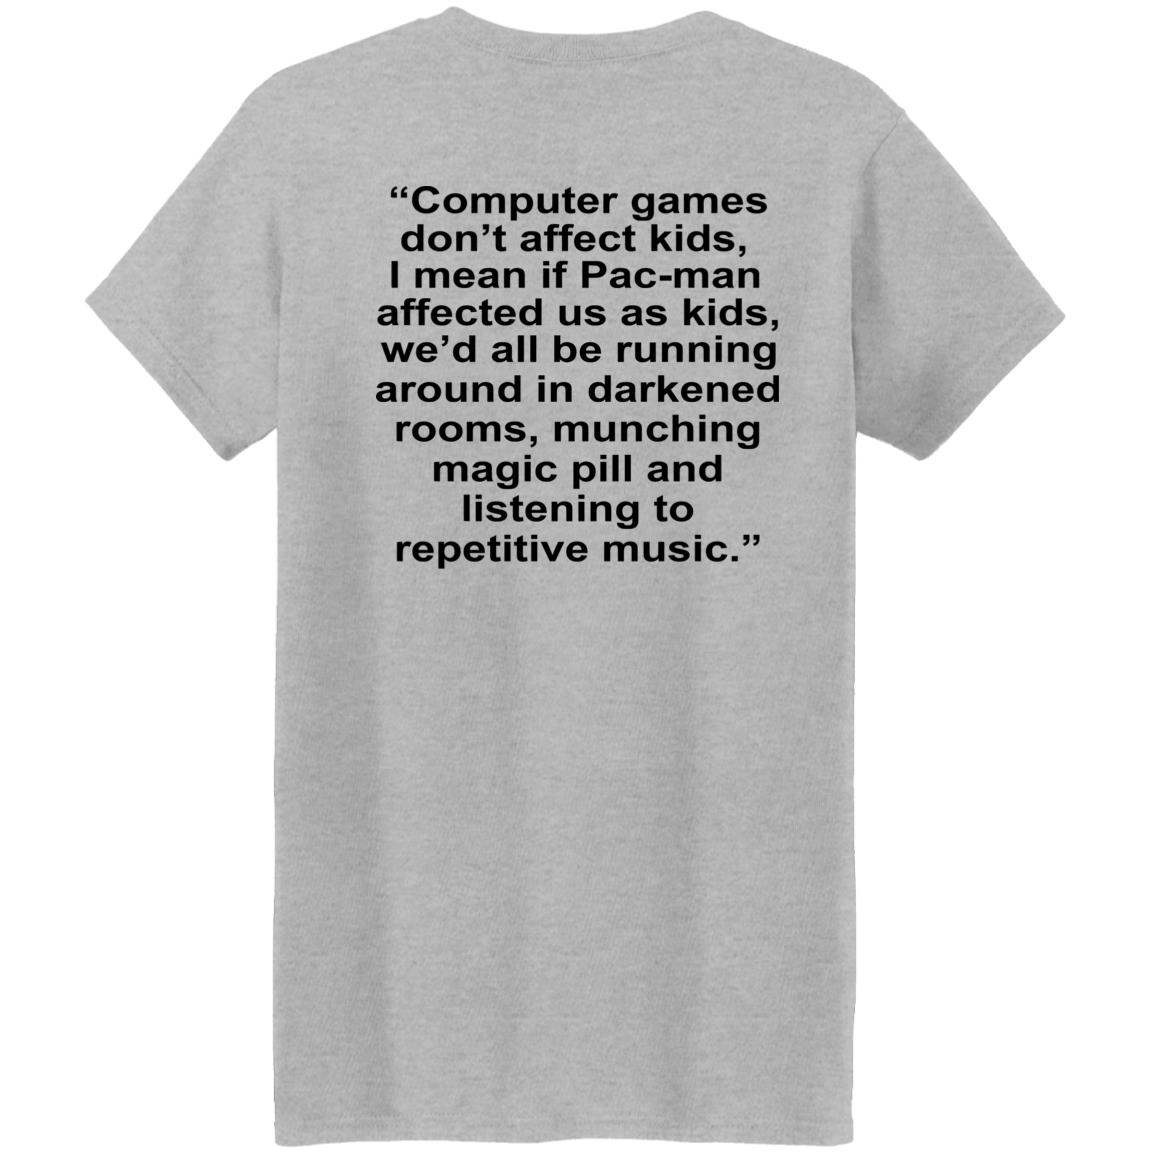 Computer games don't affect kids, i mean if pac-man affected us as